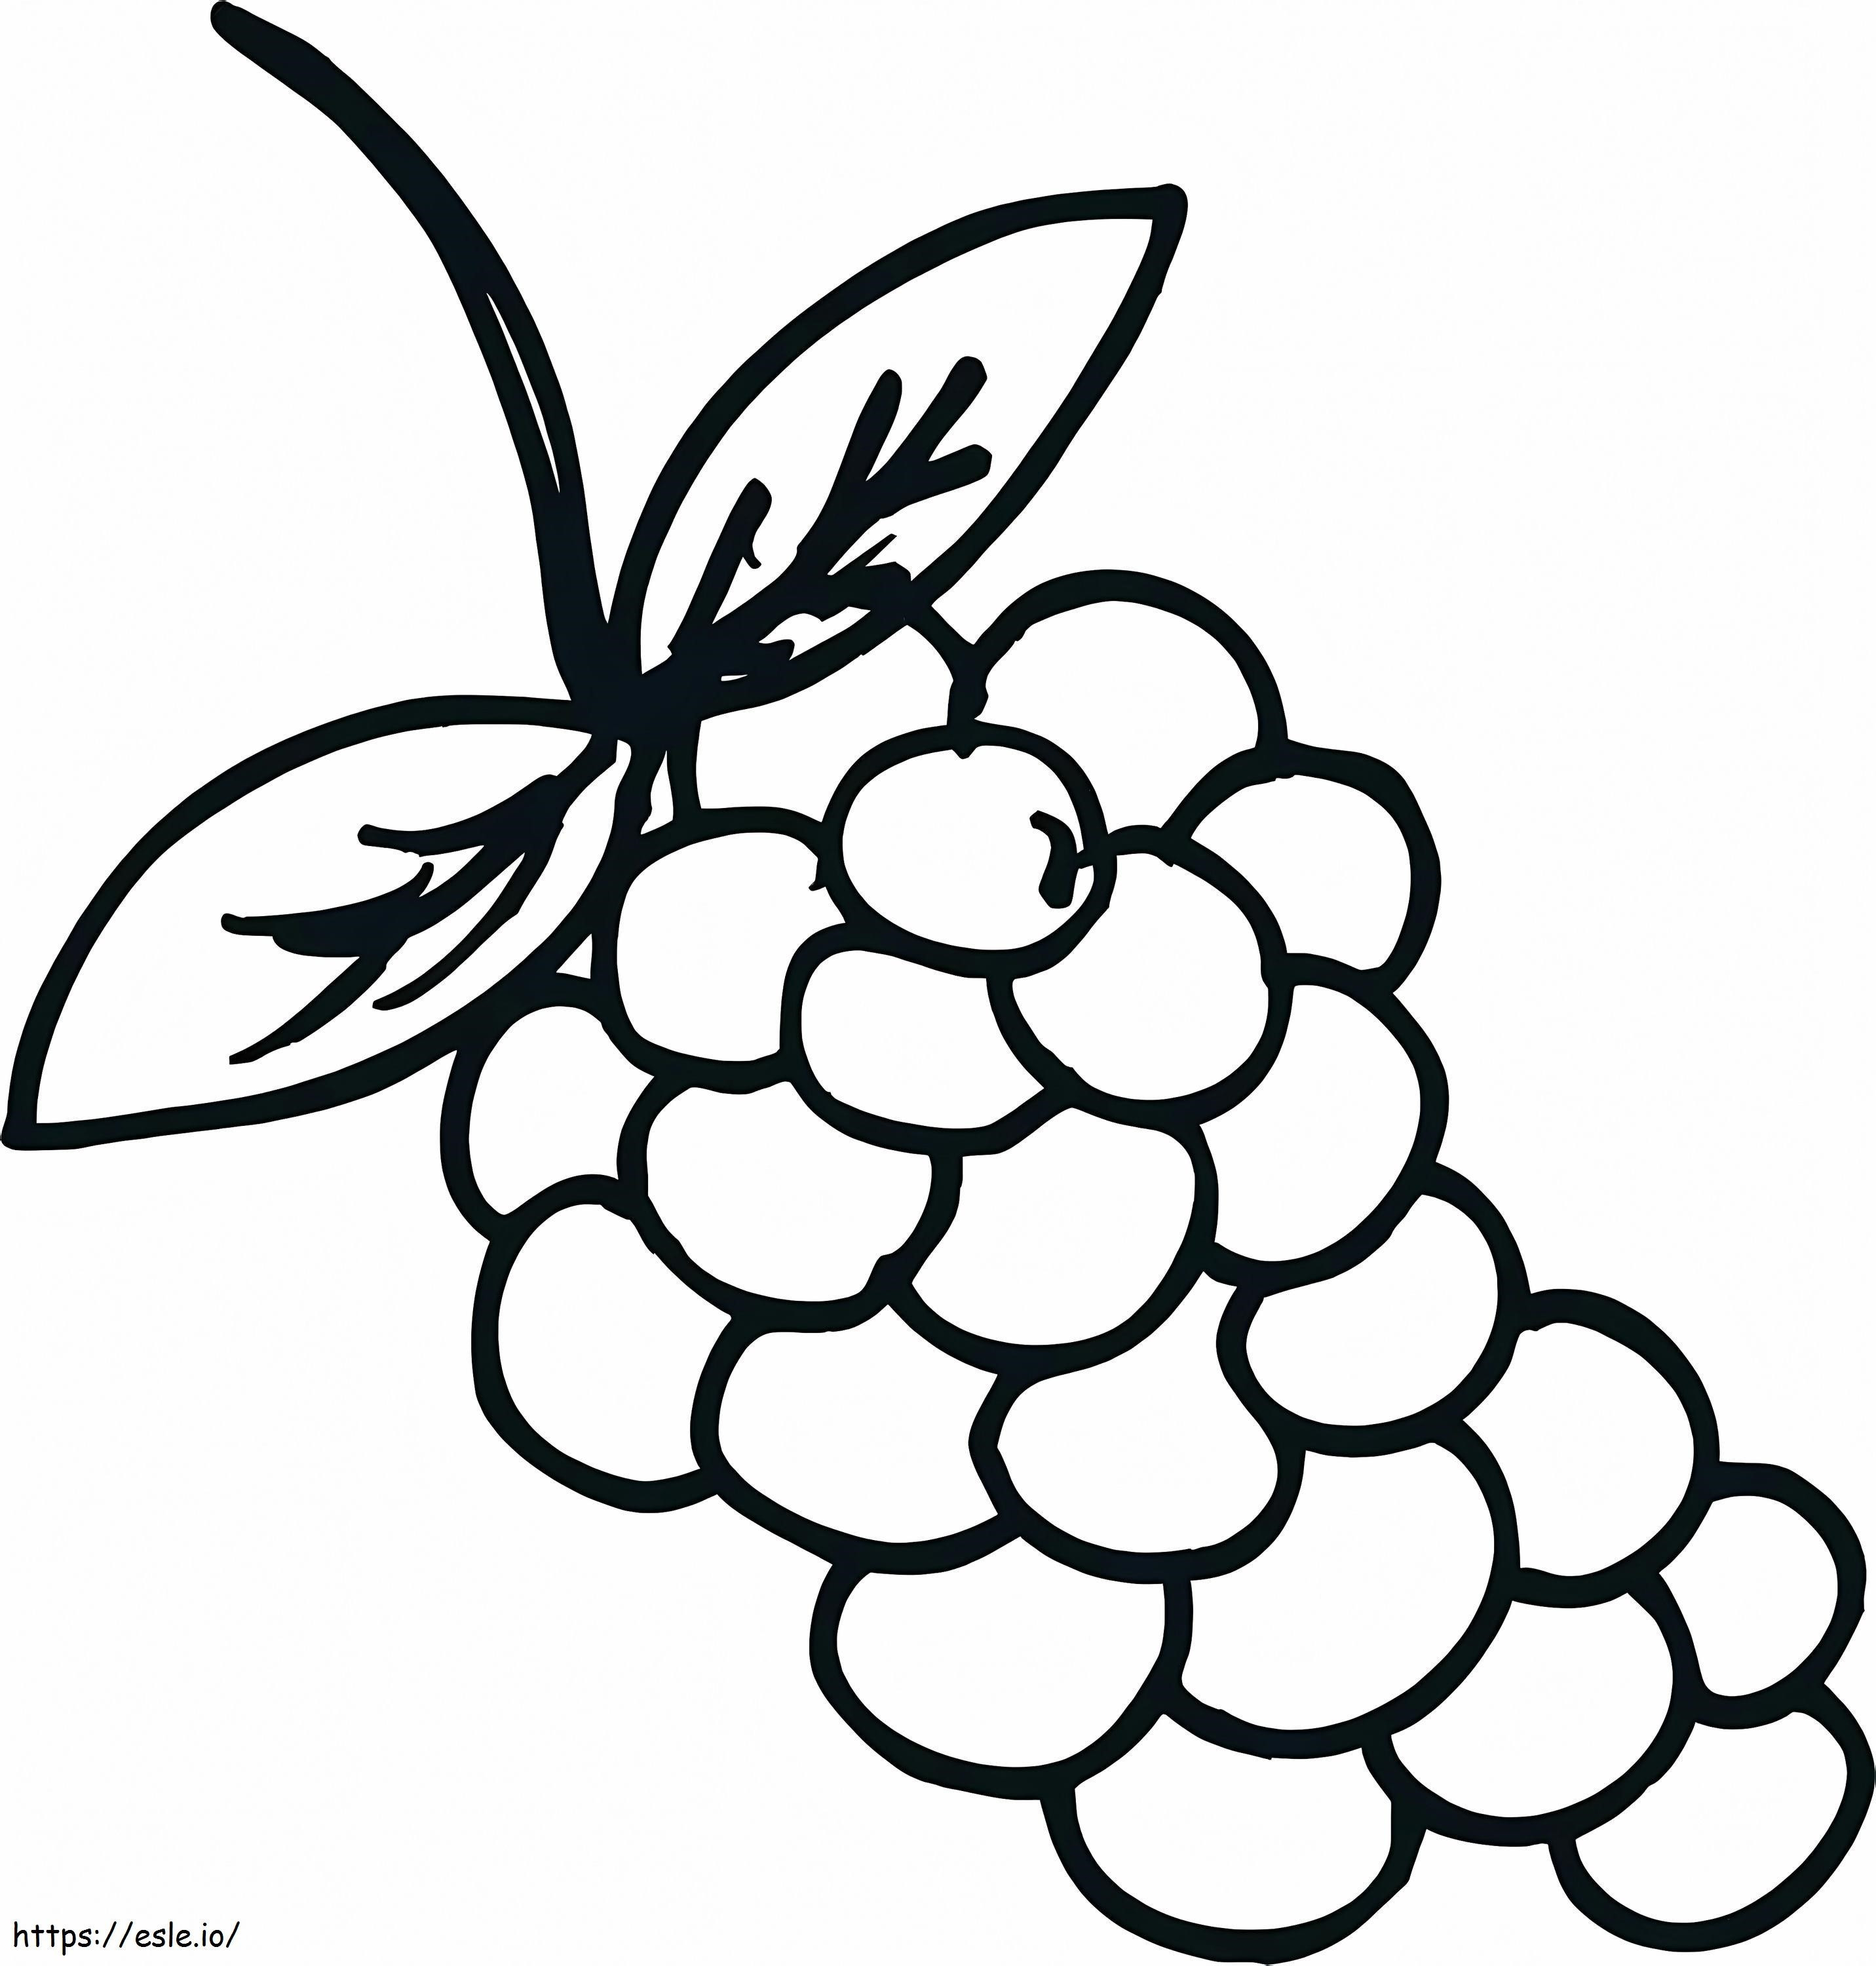 Draw Grapes coloring page